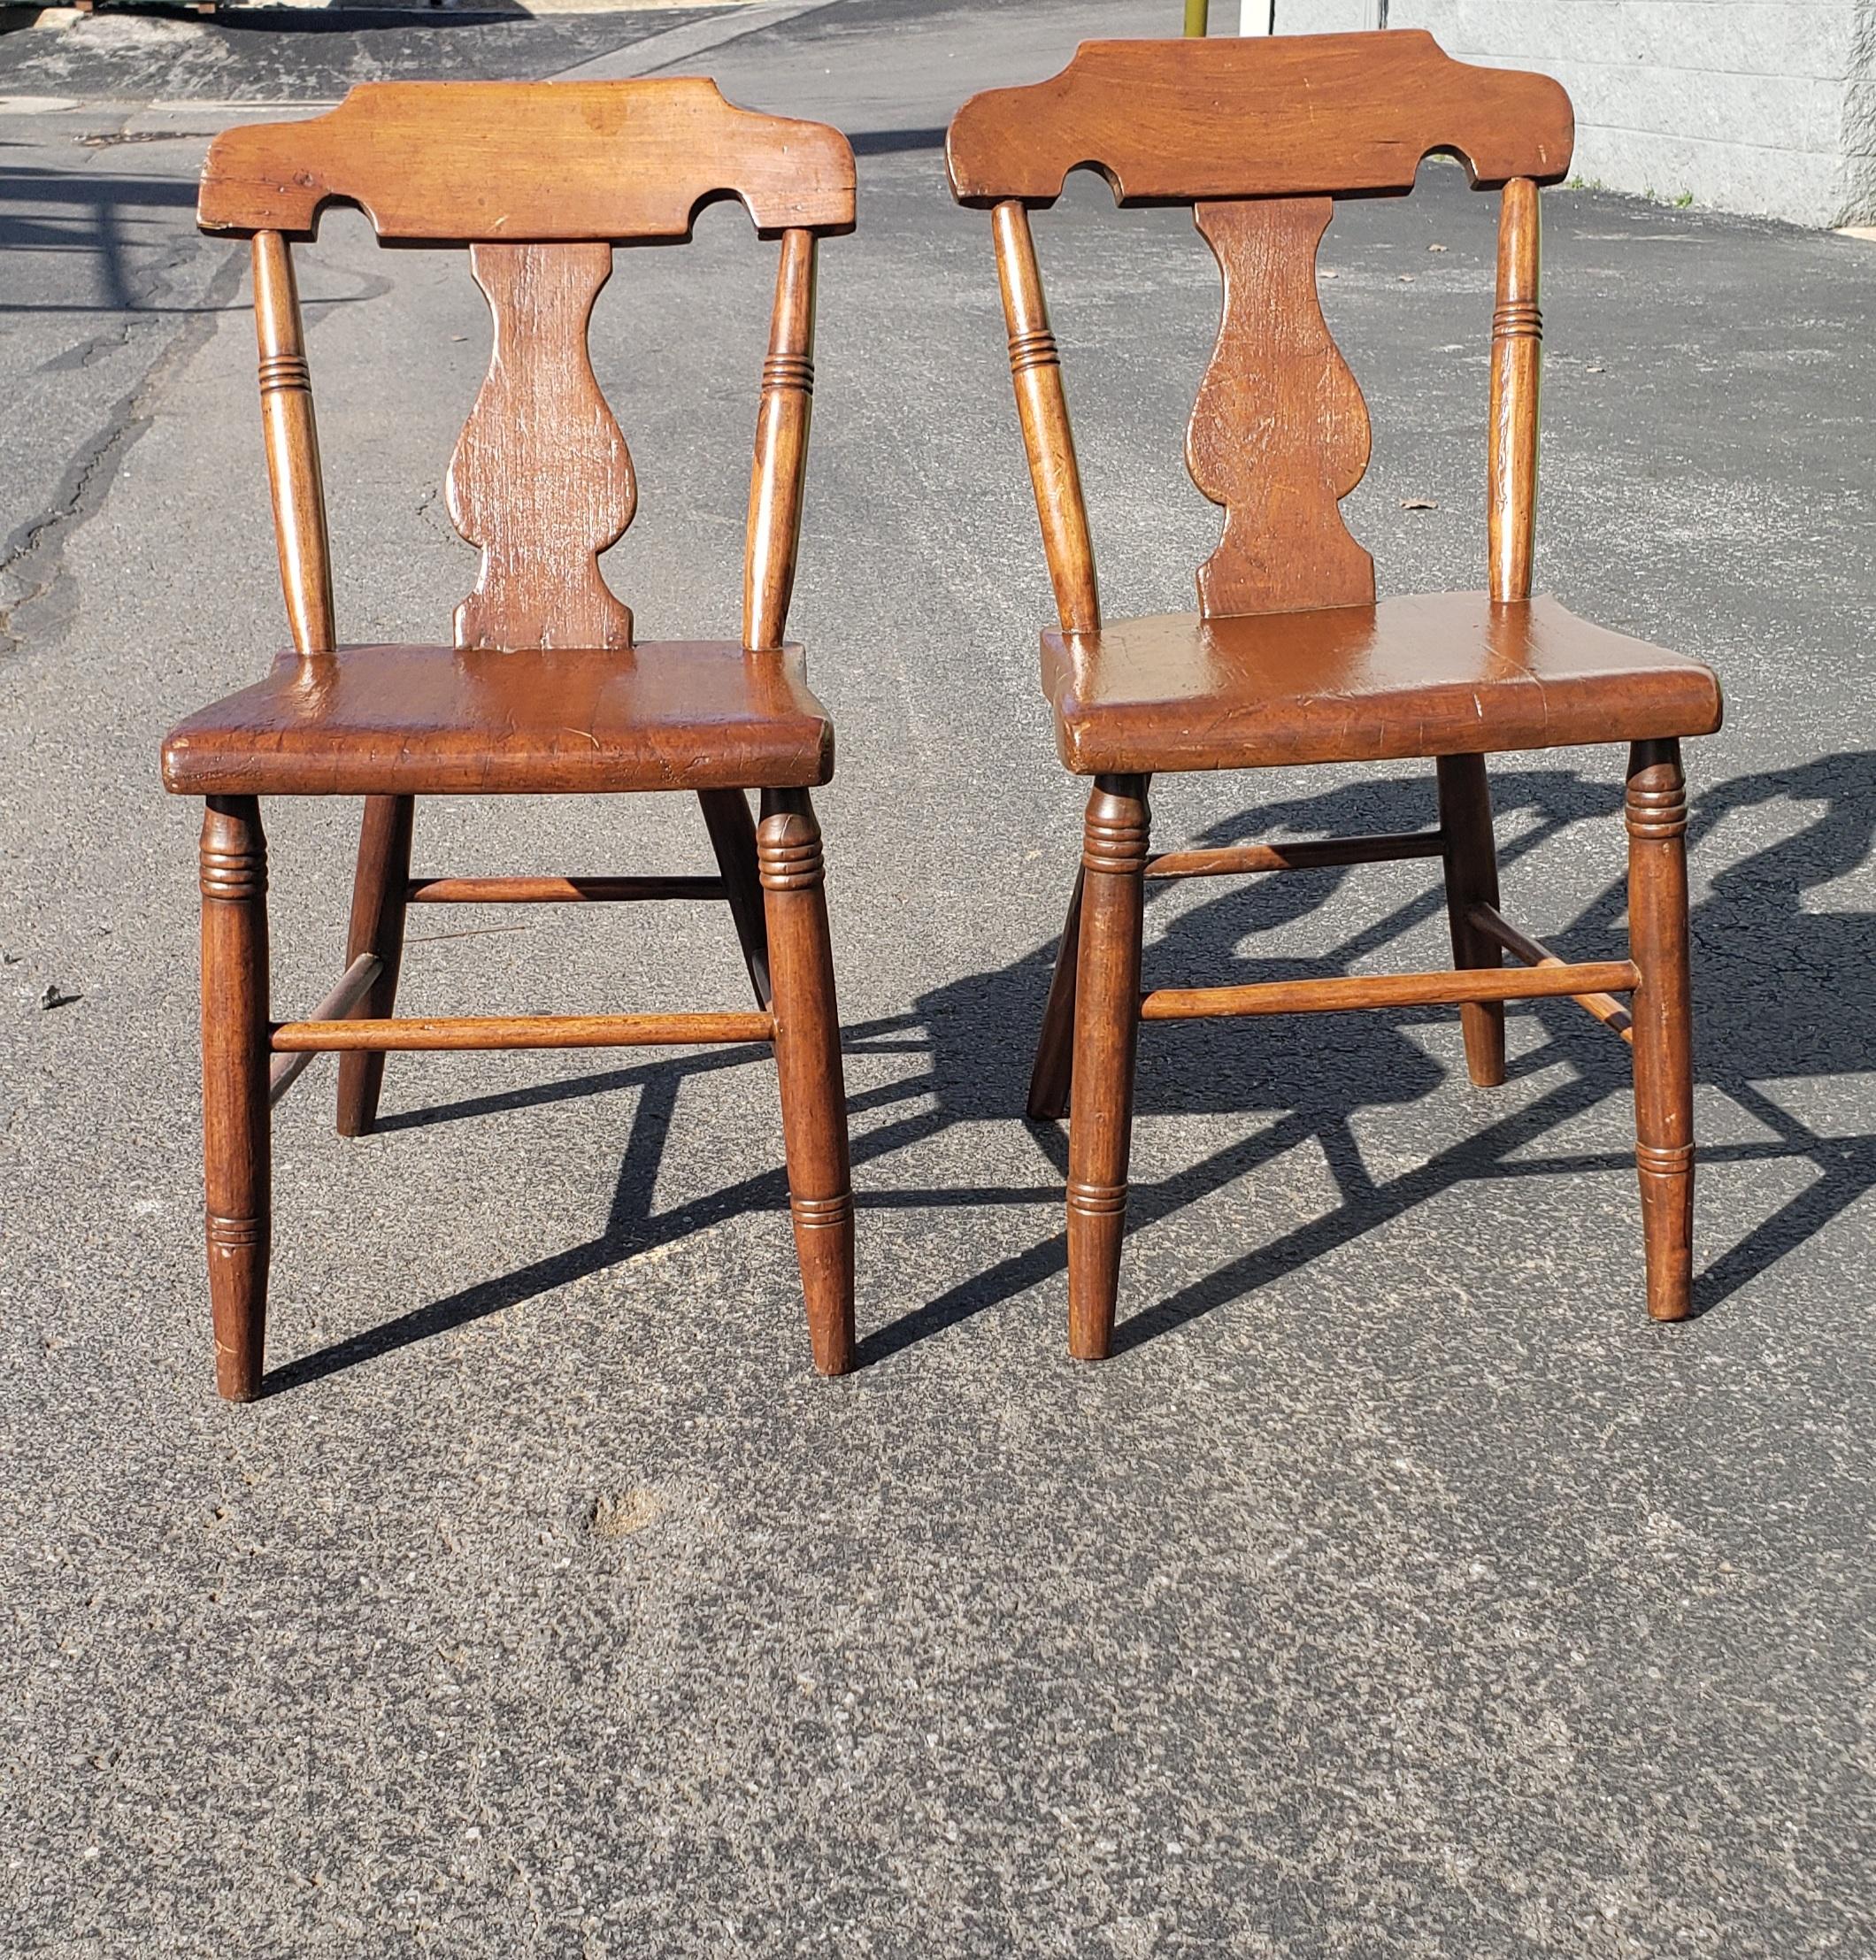 Hand-Crafted Set of 4 Early American Yew Wood Side Chairs, circa 1840s For Sale